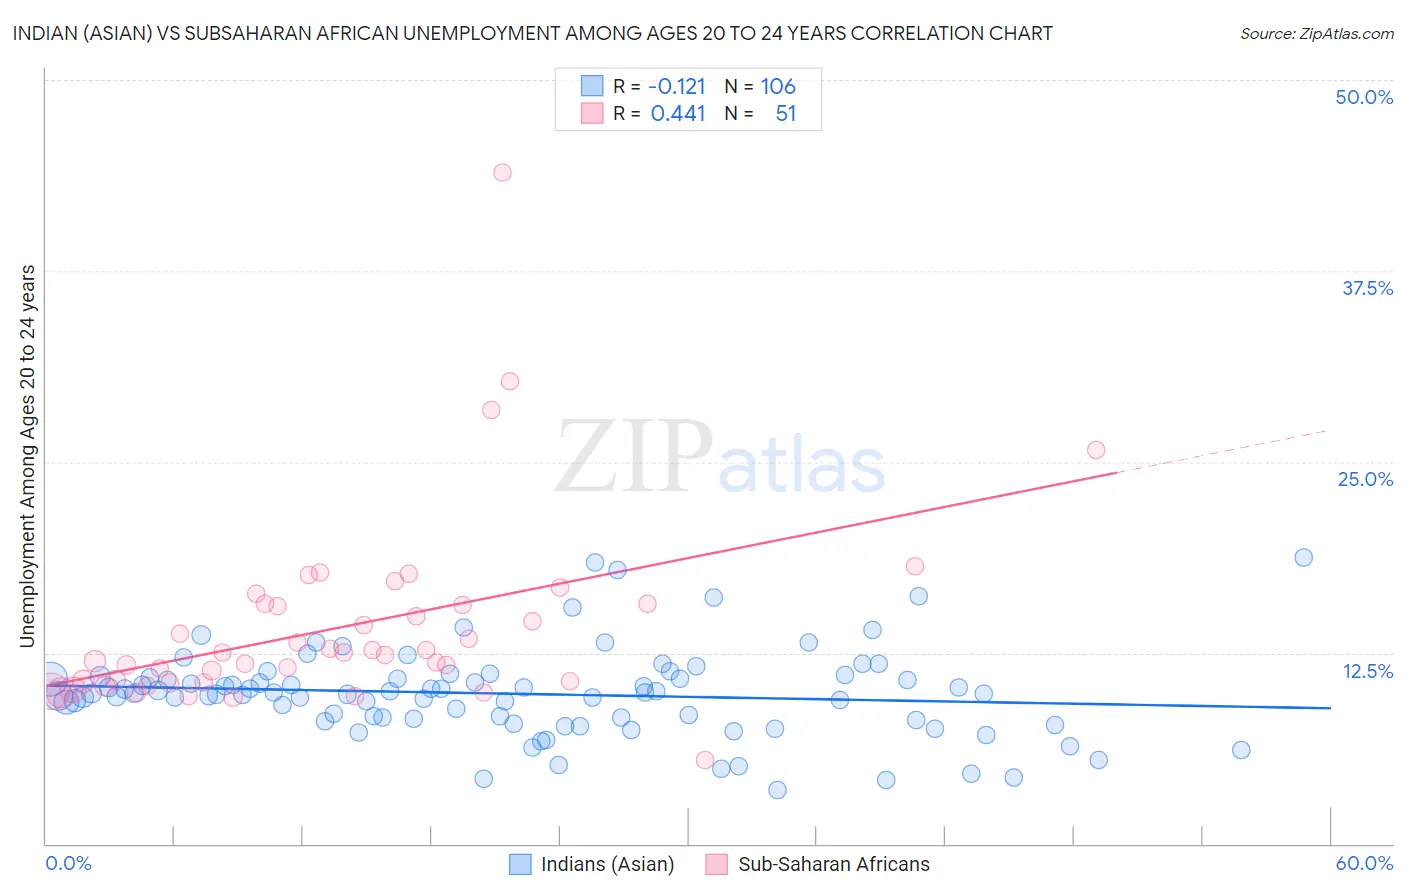 Indian (Asian) vs Subsaharan African Unemployment Among Ages 20 to 24 years